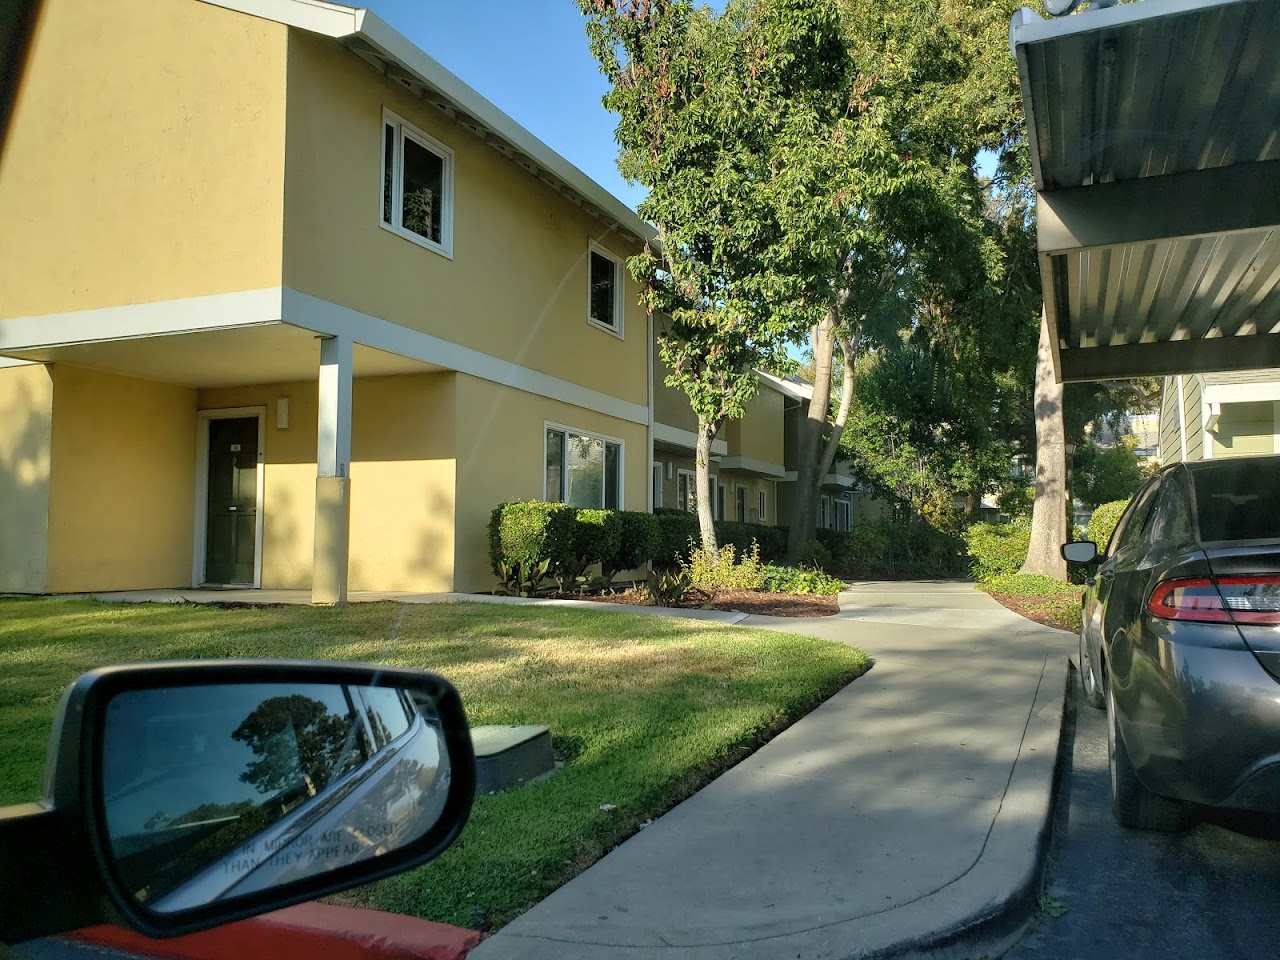 Photo of LOS ROBLES APTS (UNION CITY). Affordable housing located at 32300 ALMADEN BLVD UNION CITY, CA 94587